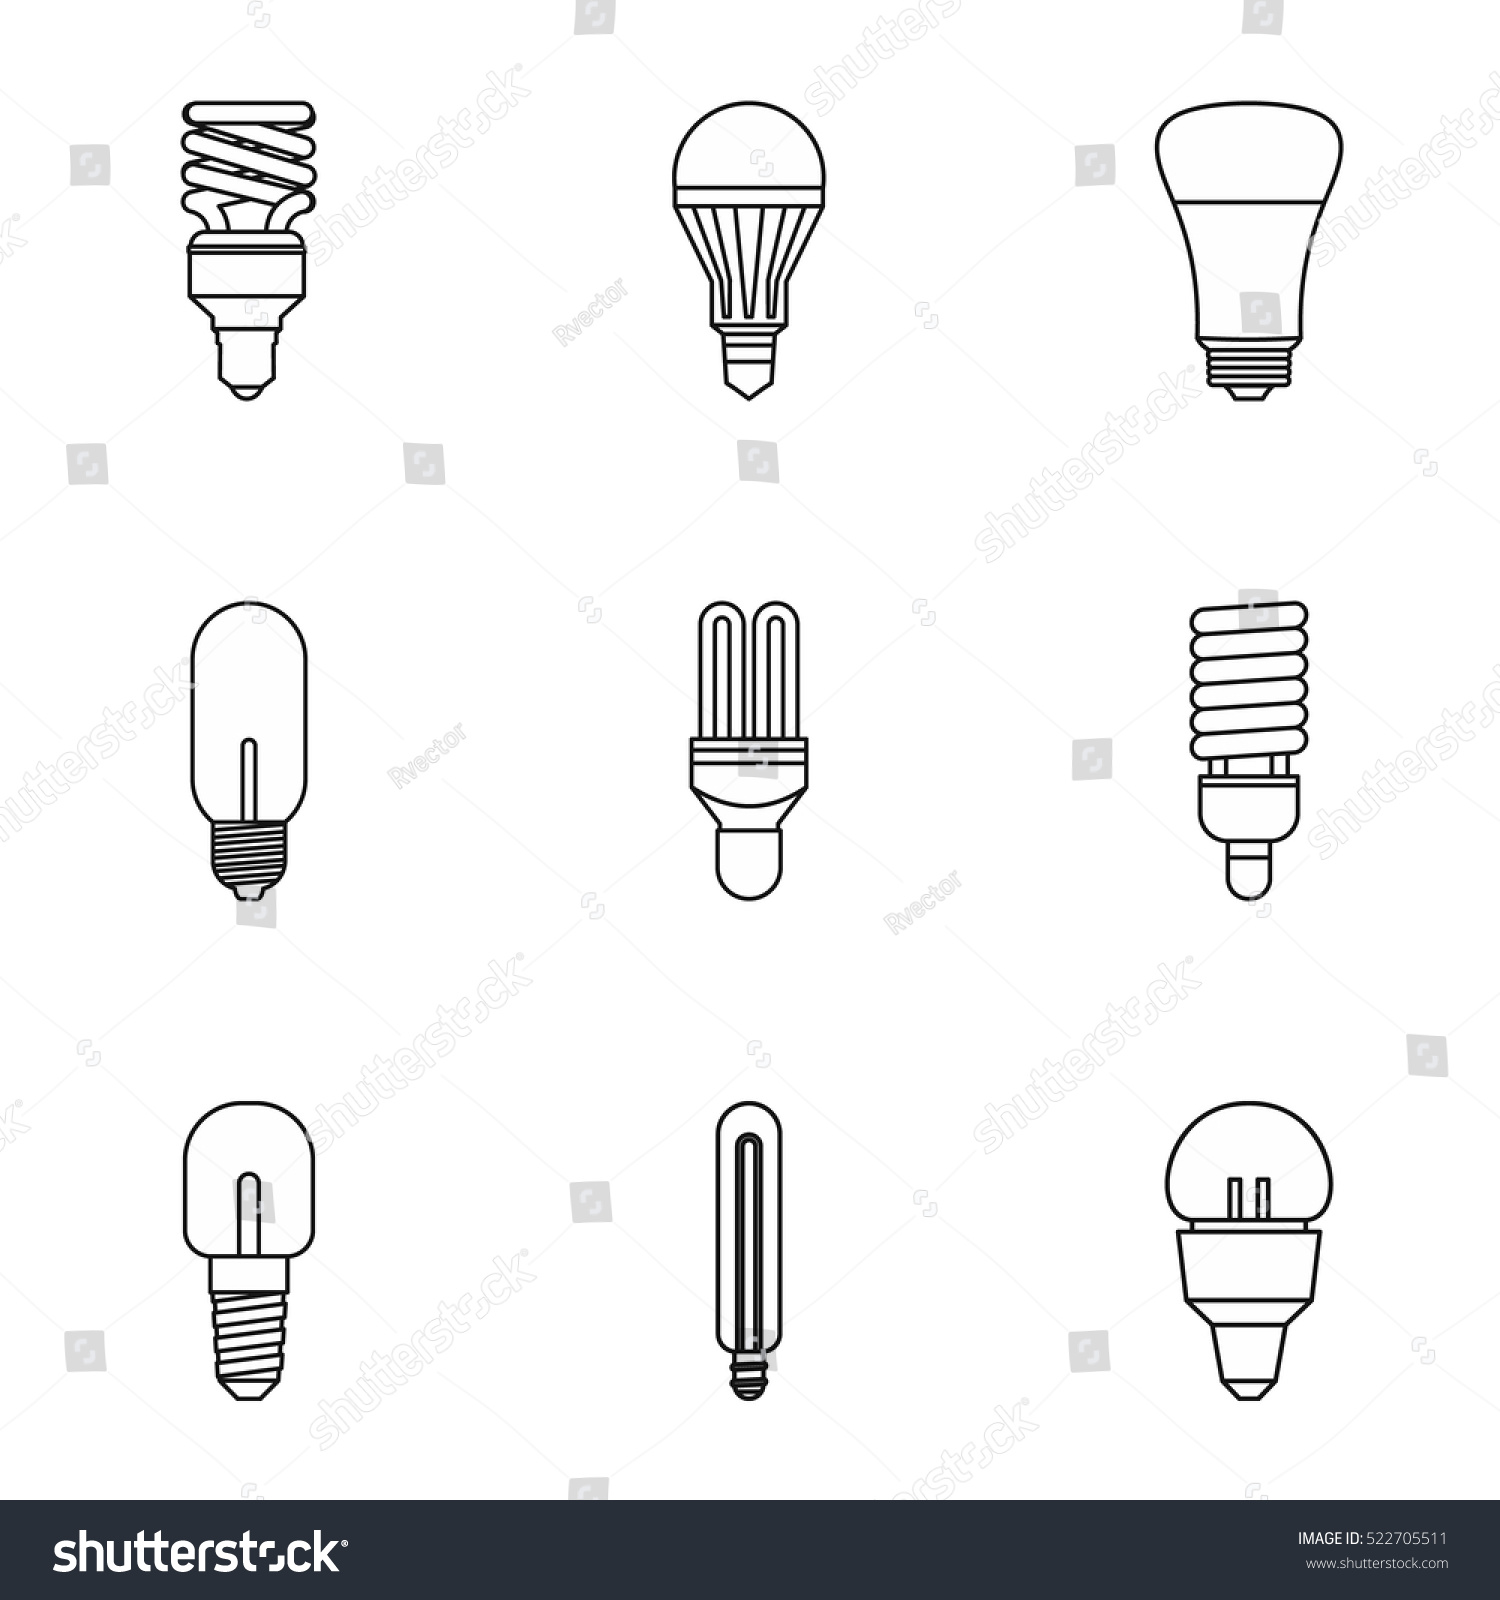 43,266 Home furniture electrical icon Images, Stock Photos & Vectors ...